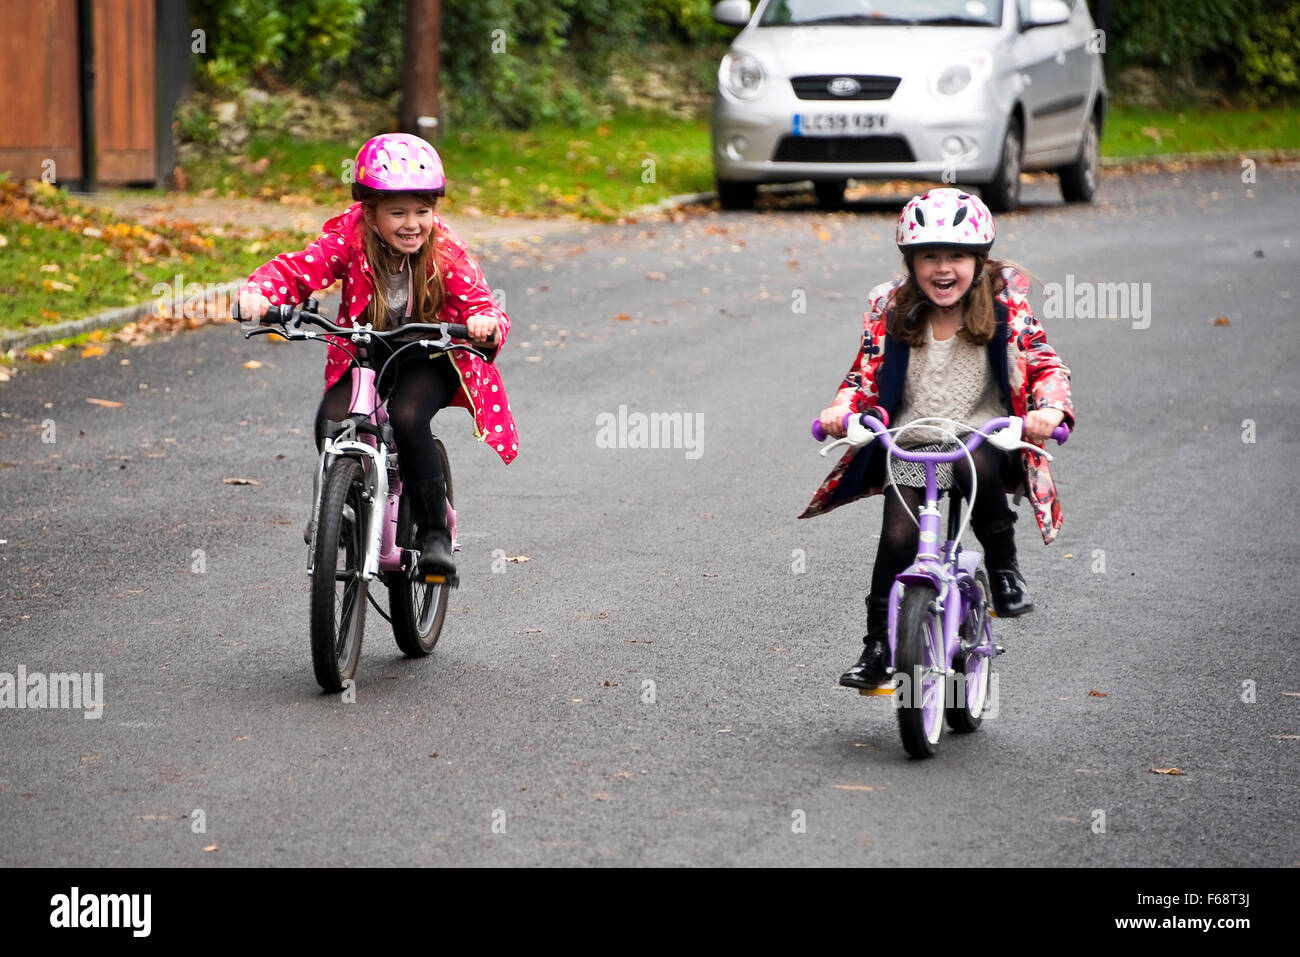 Horizontal portrait of young girls racing their bikes along the road. Stock Photo